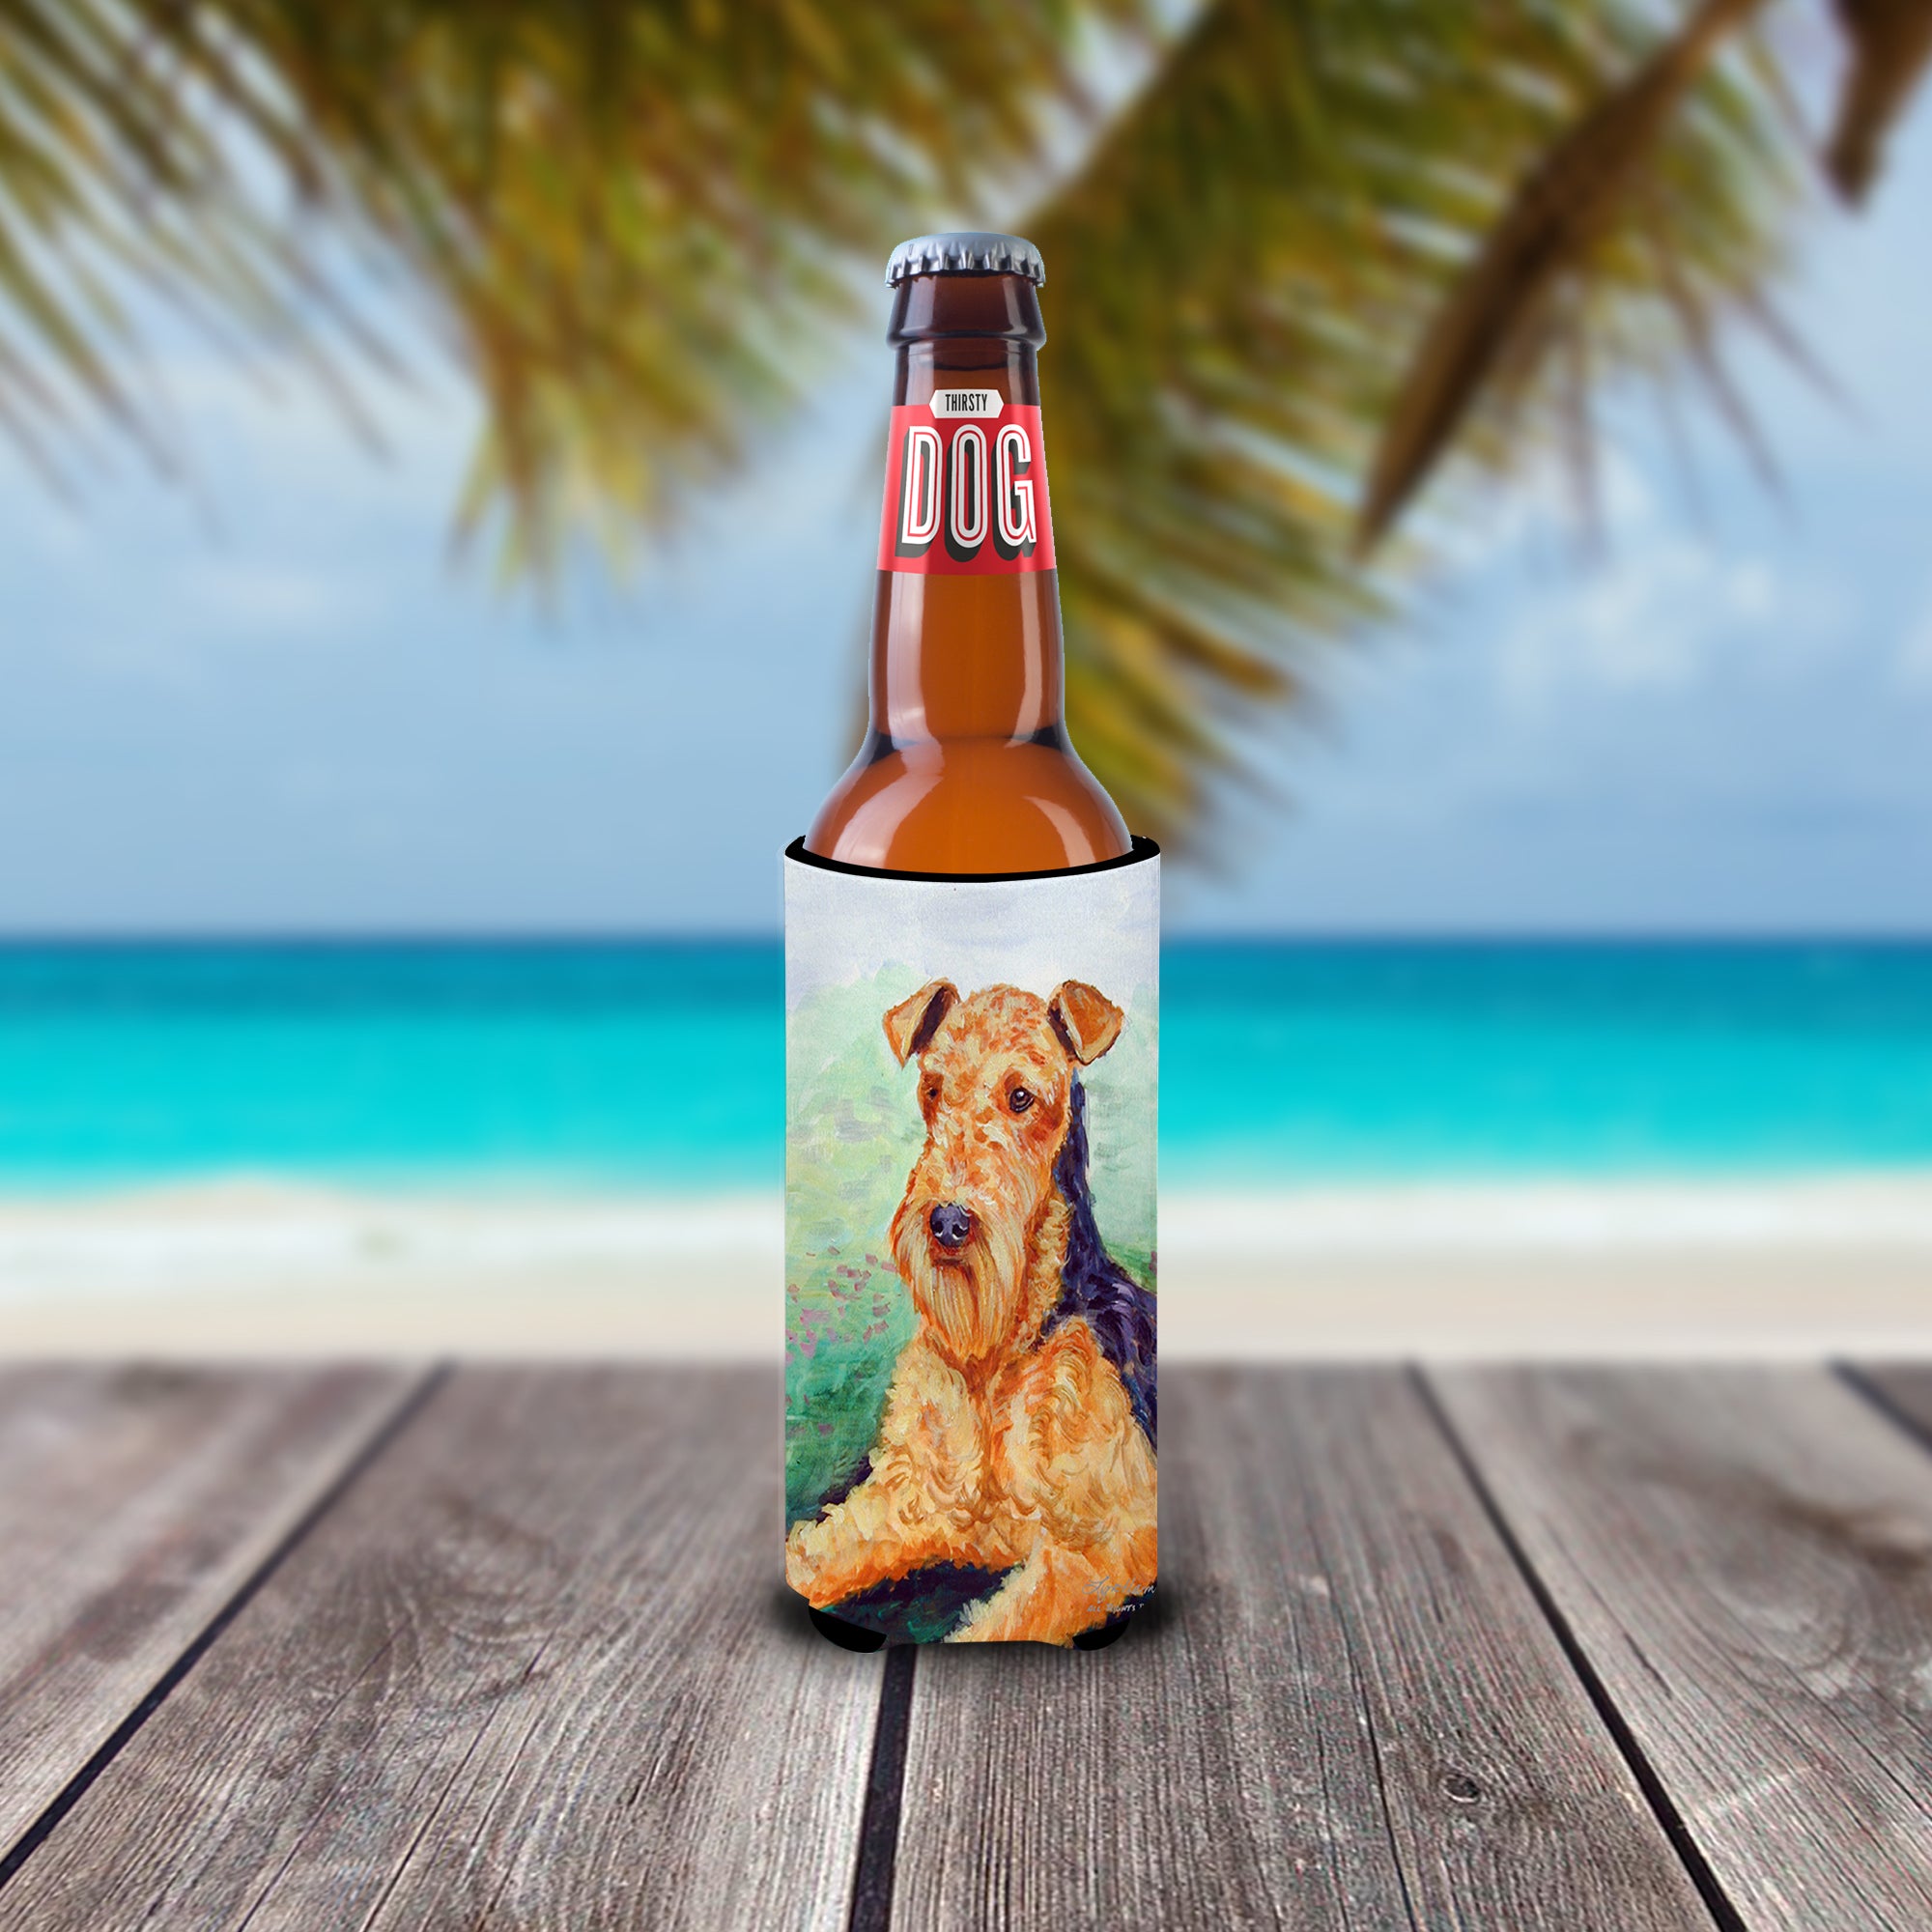 Airedale Terrier Ultra Beverage Insulators for slim cans 7239MUK